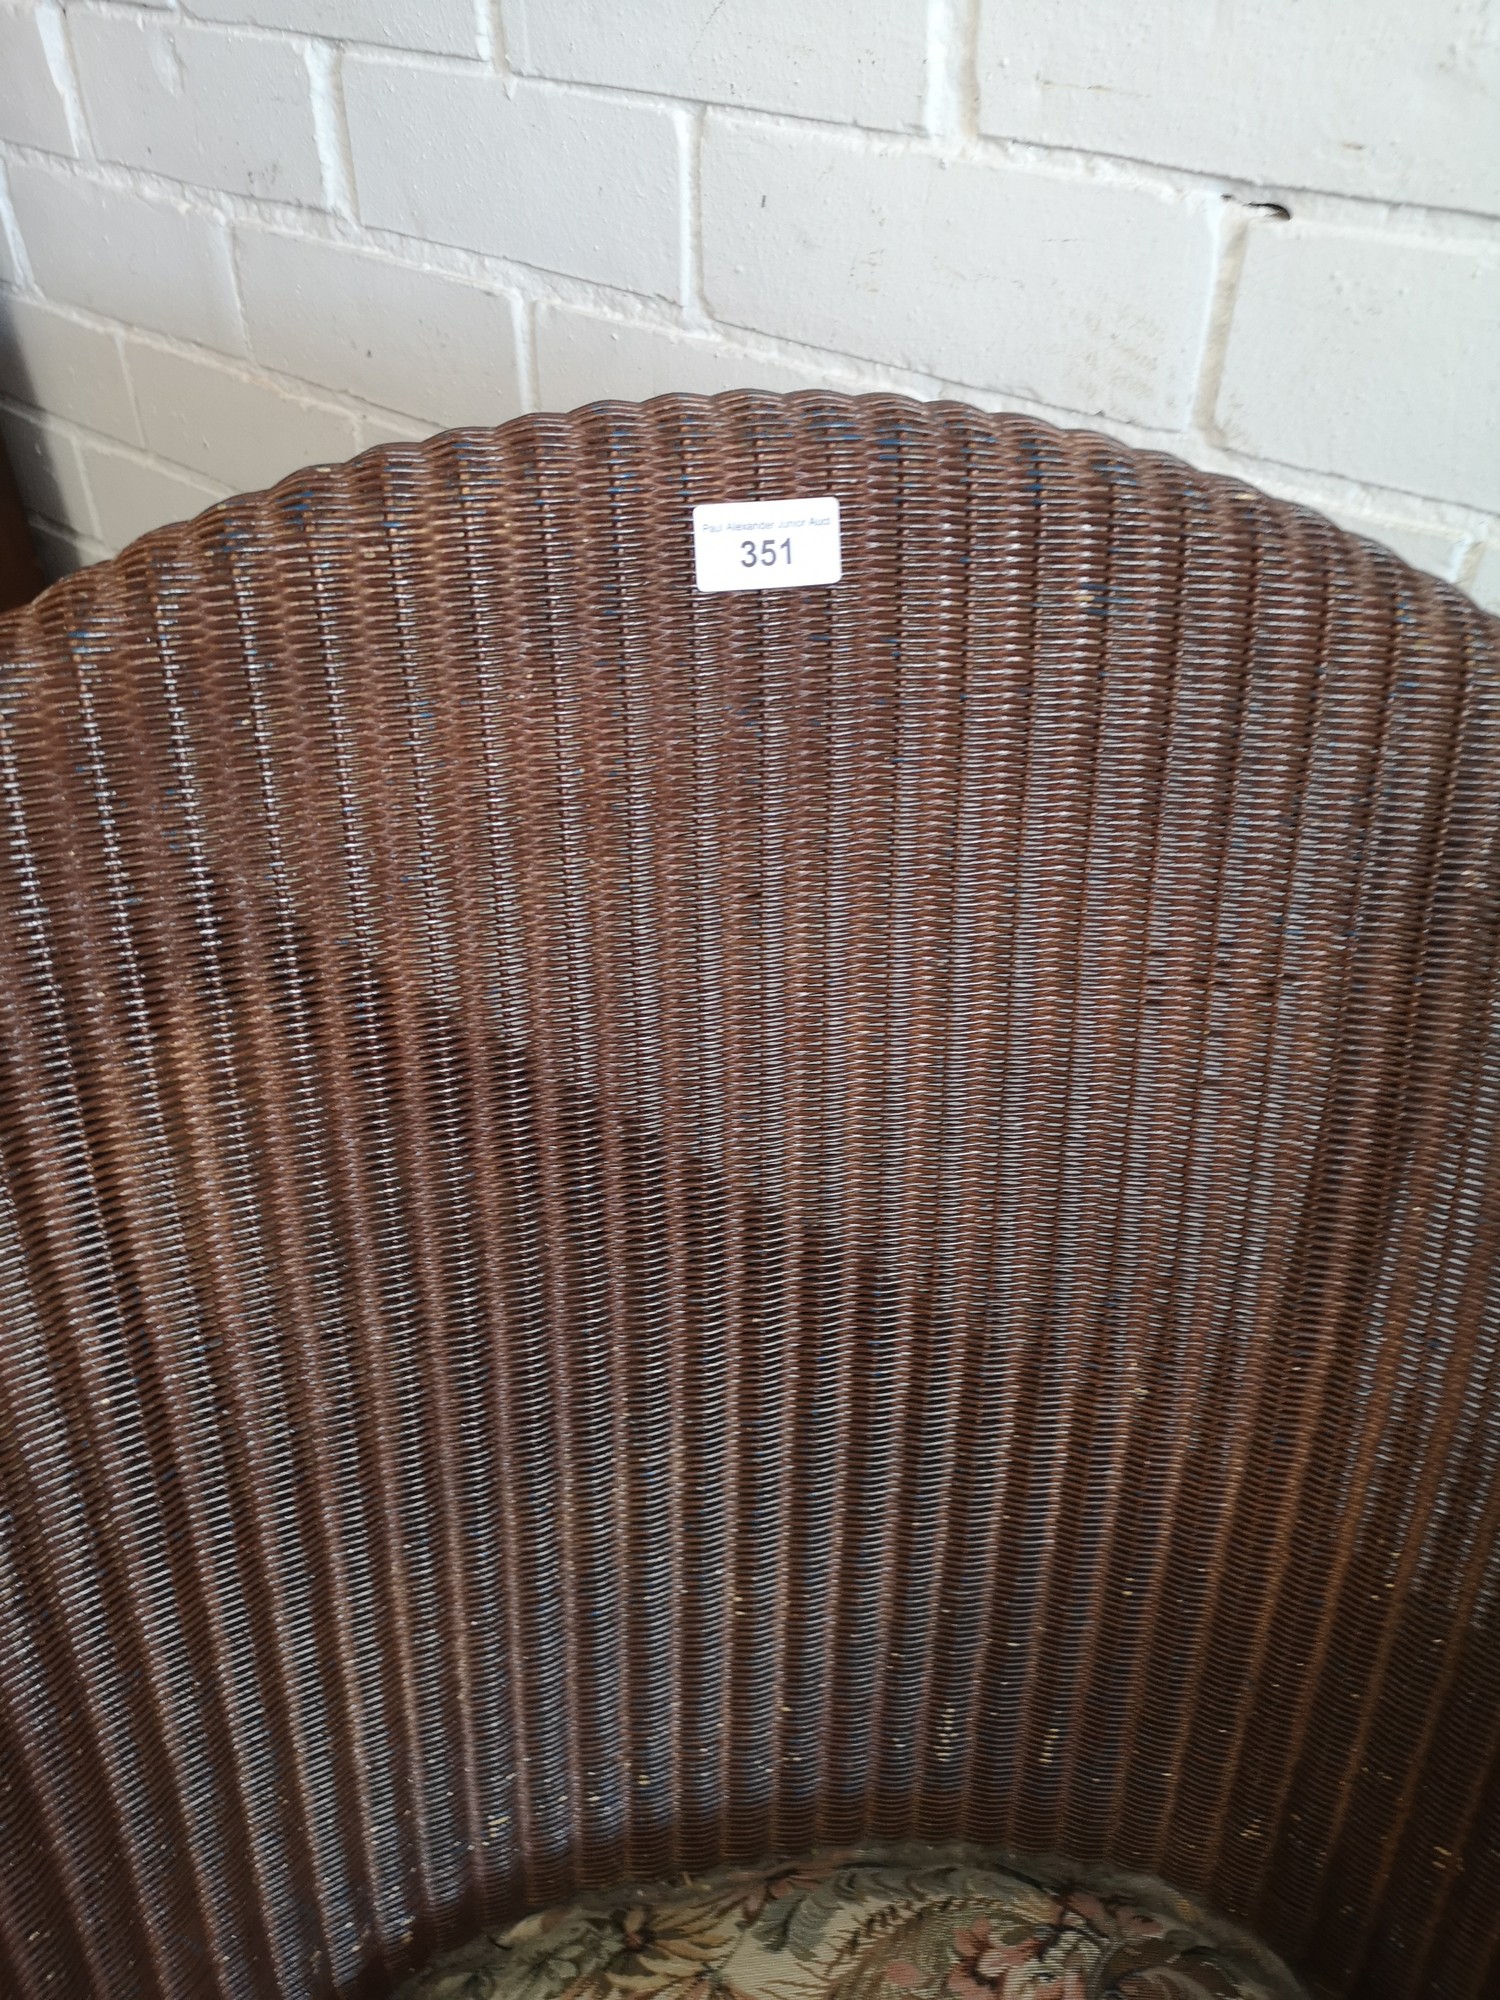 Lloyd loom style wicker chair with upholstery. - Image 5 of 5